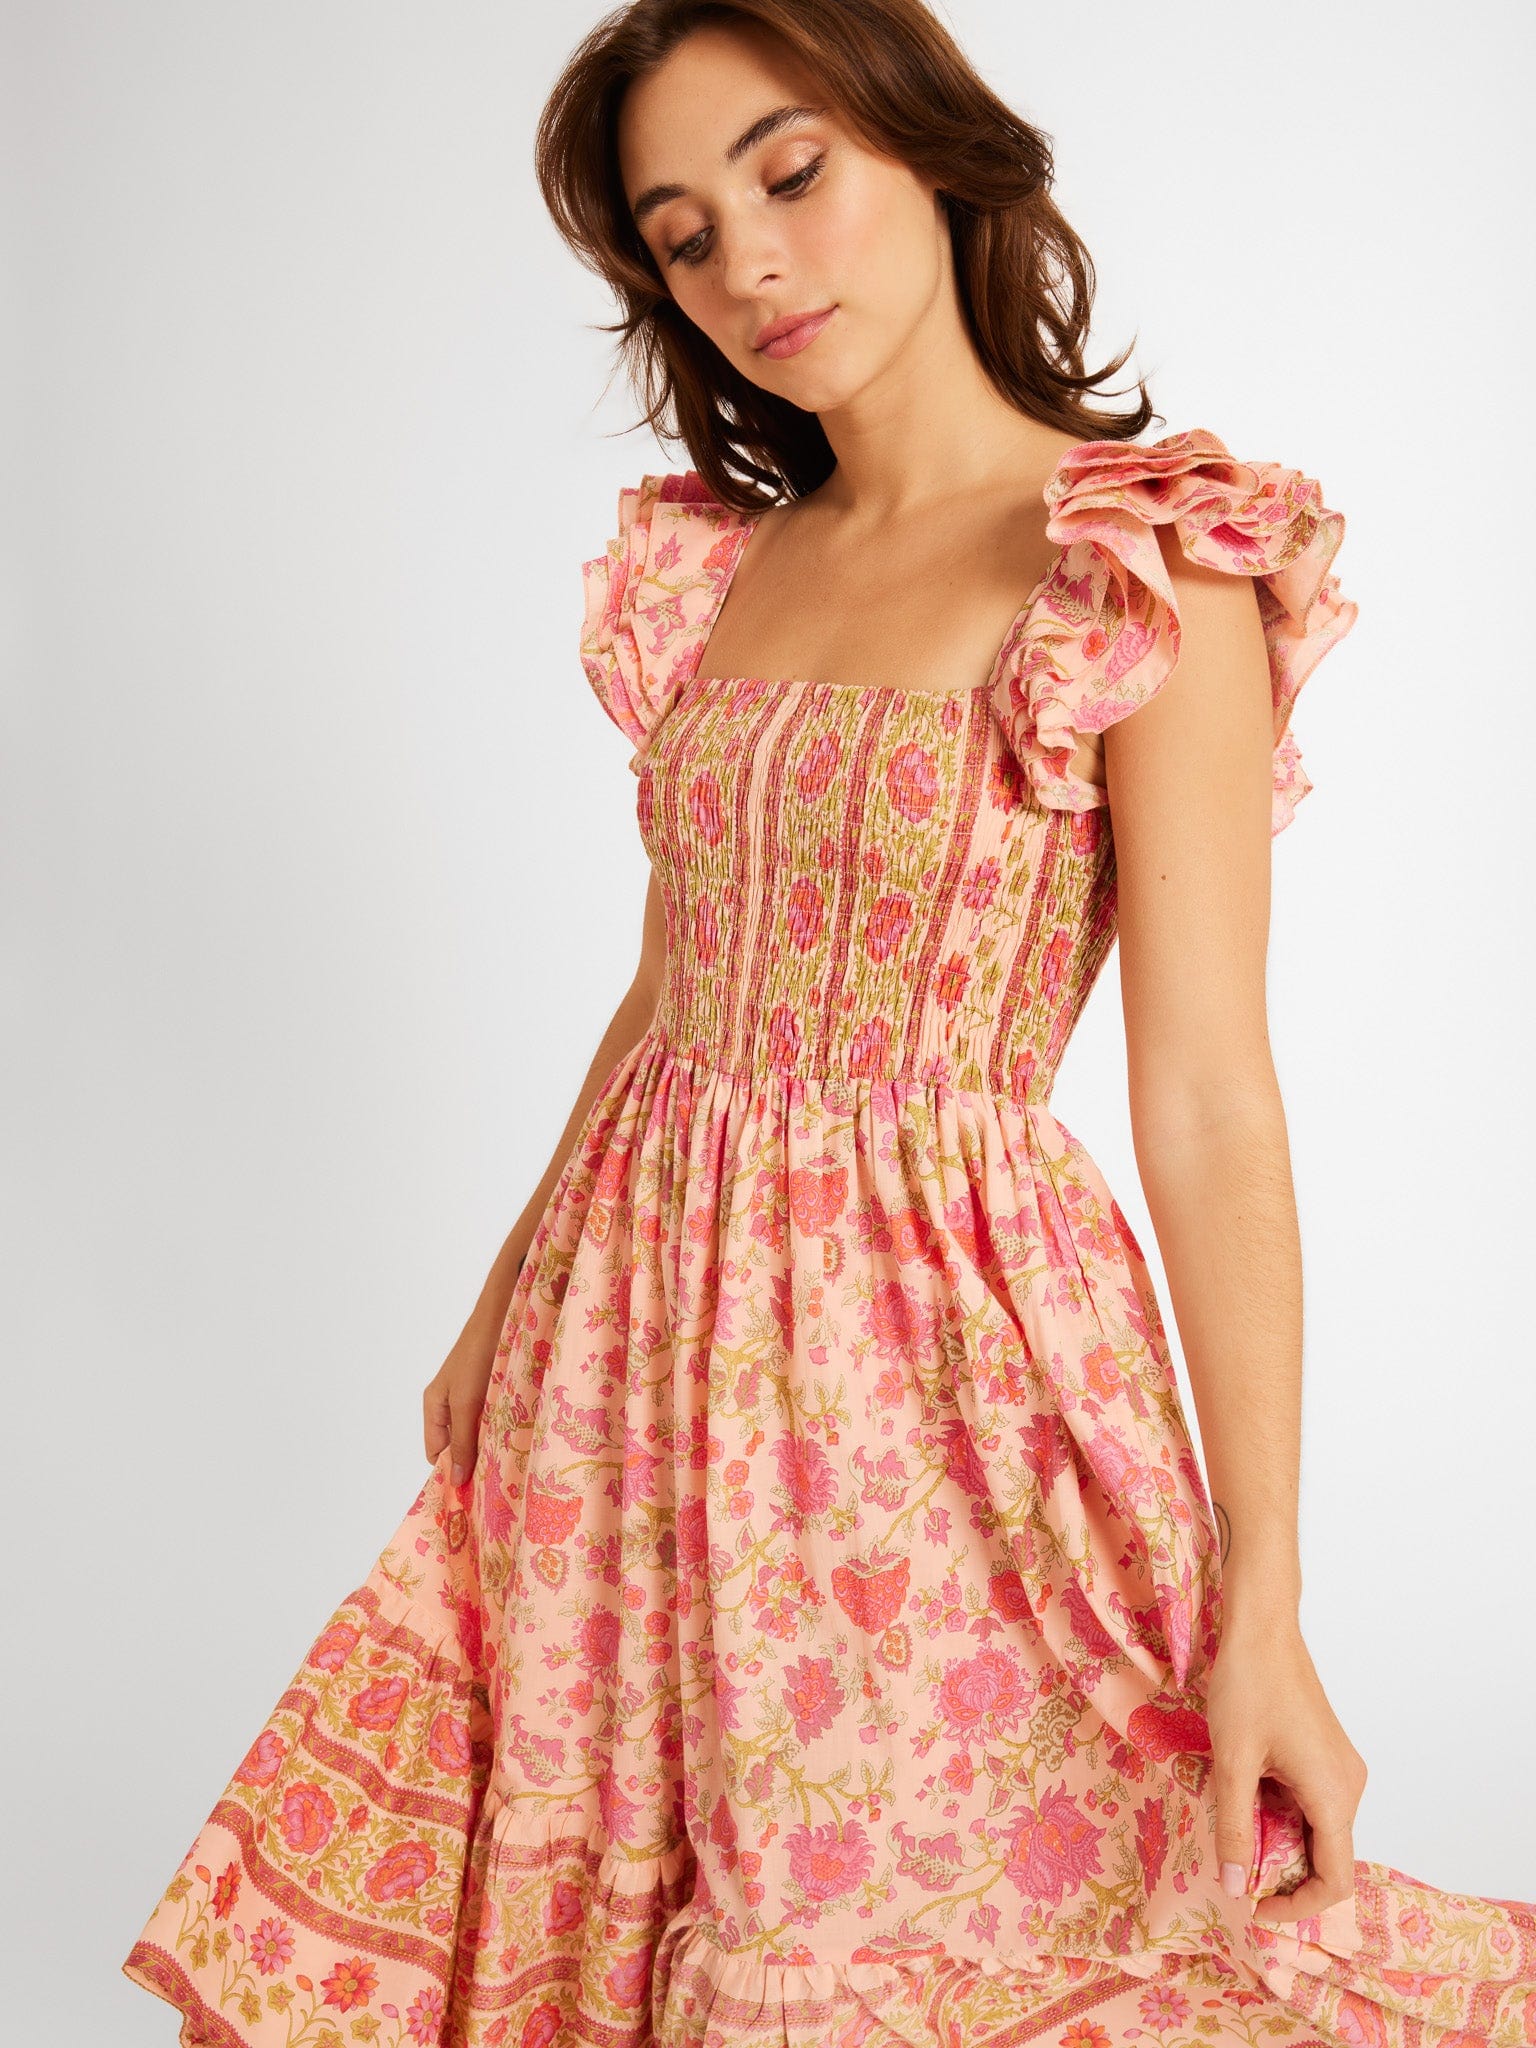 MILLE Clothing Olympia Dress in Desert Bloom